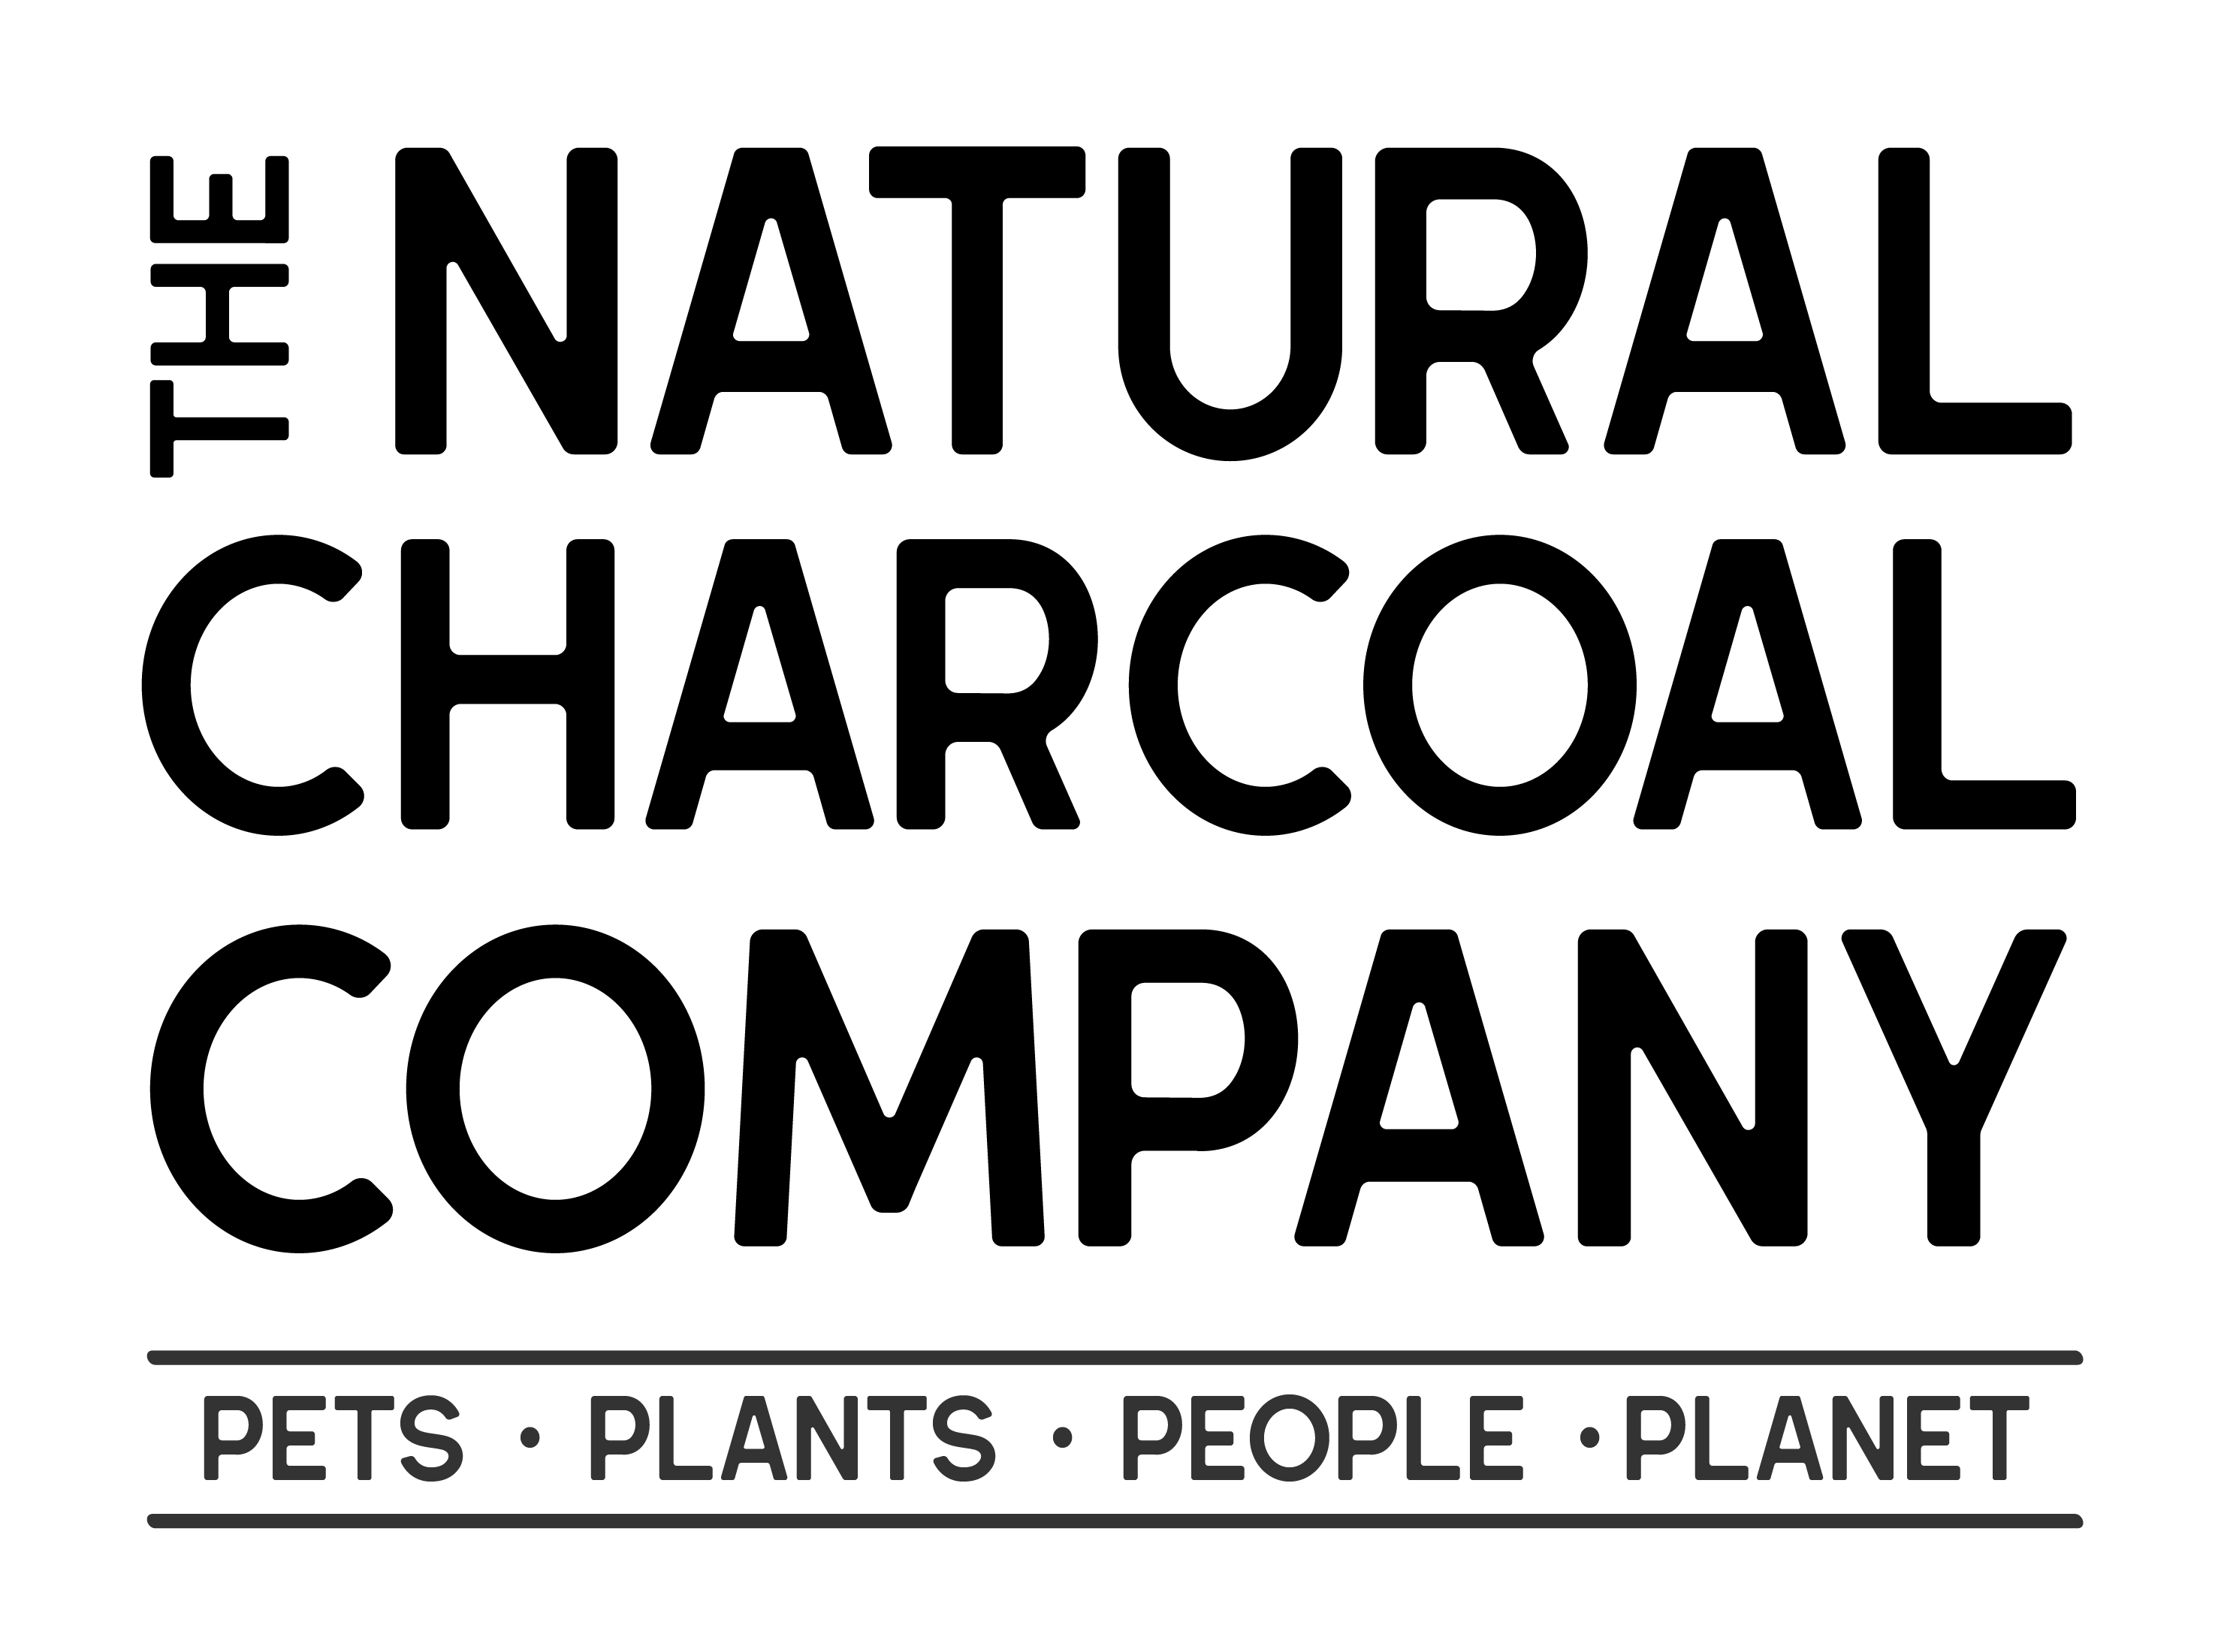 The Natural Charcoal Company